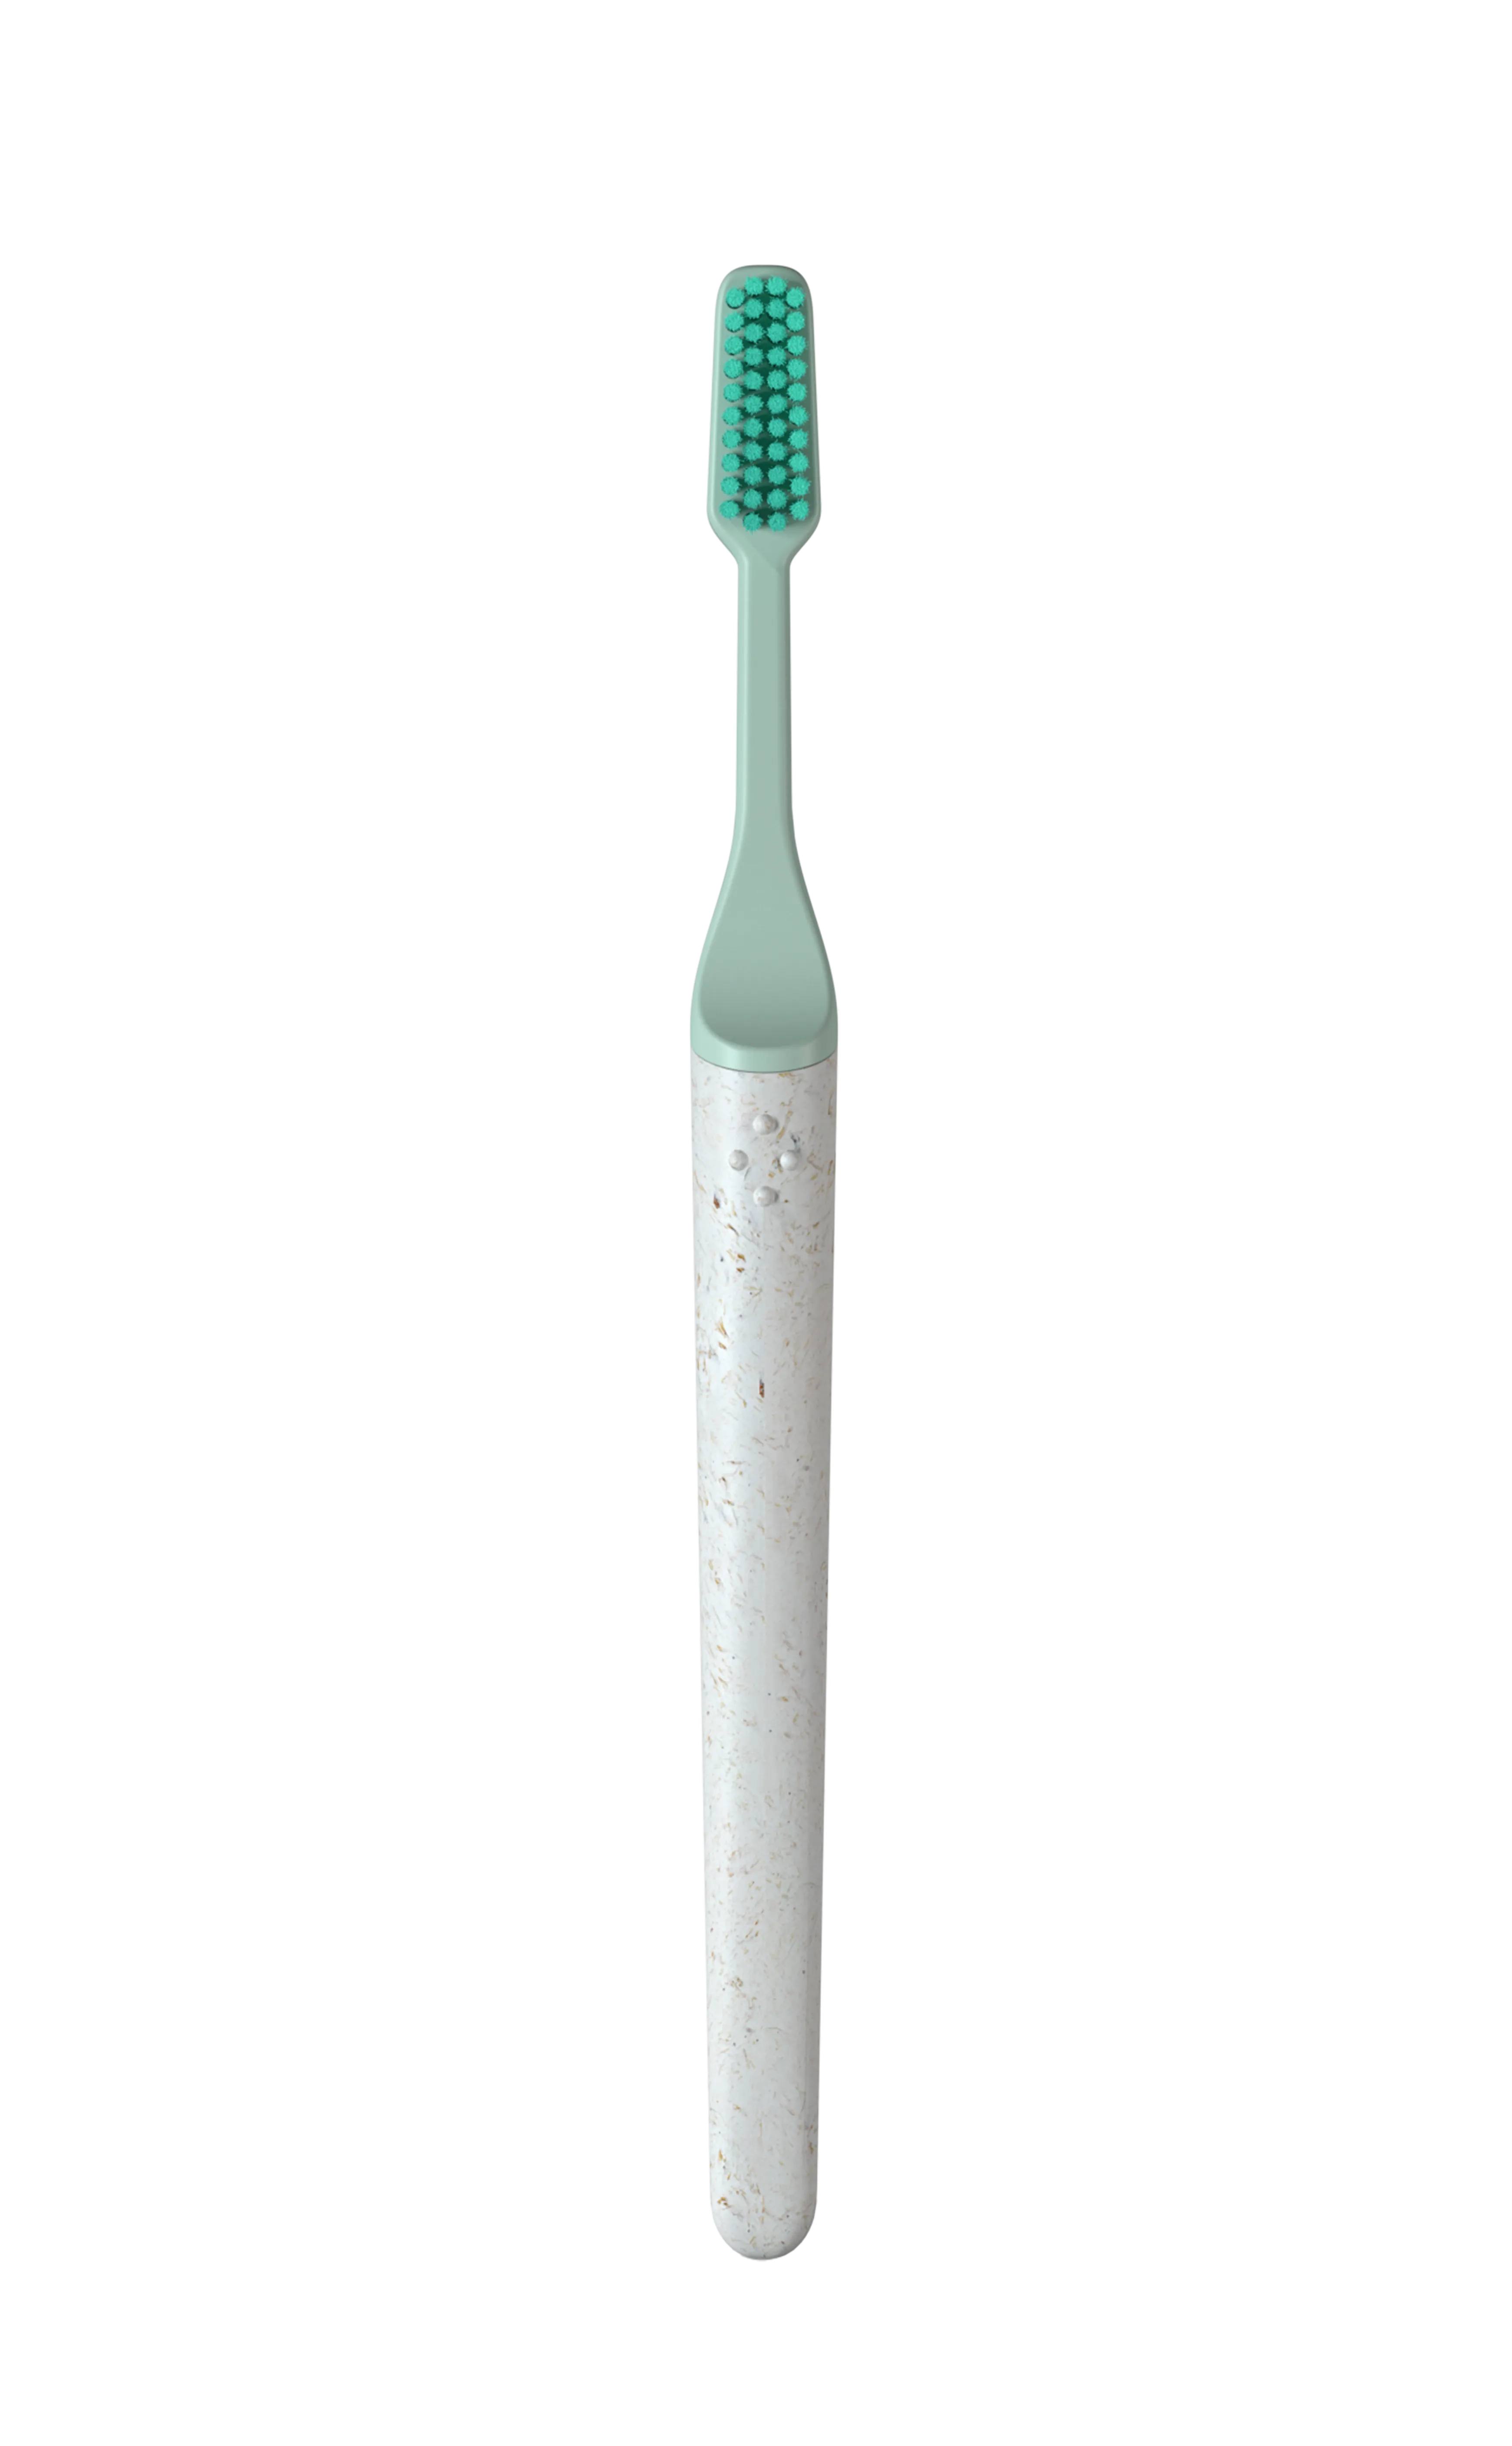 TIO toothbrush in front of a transparent background